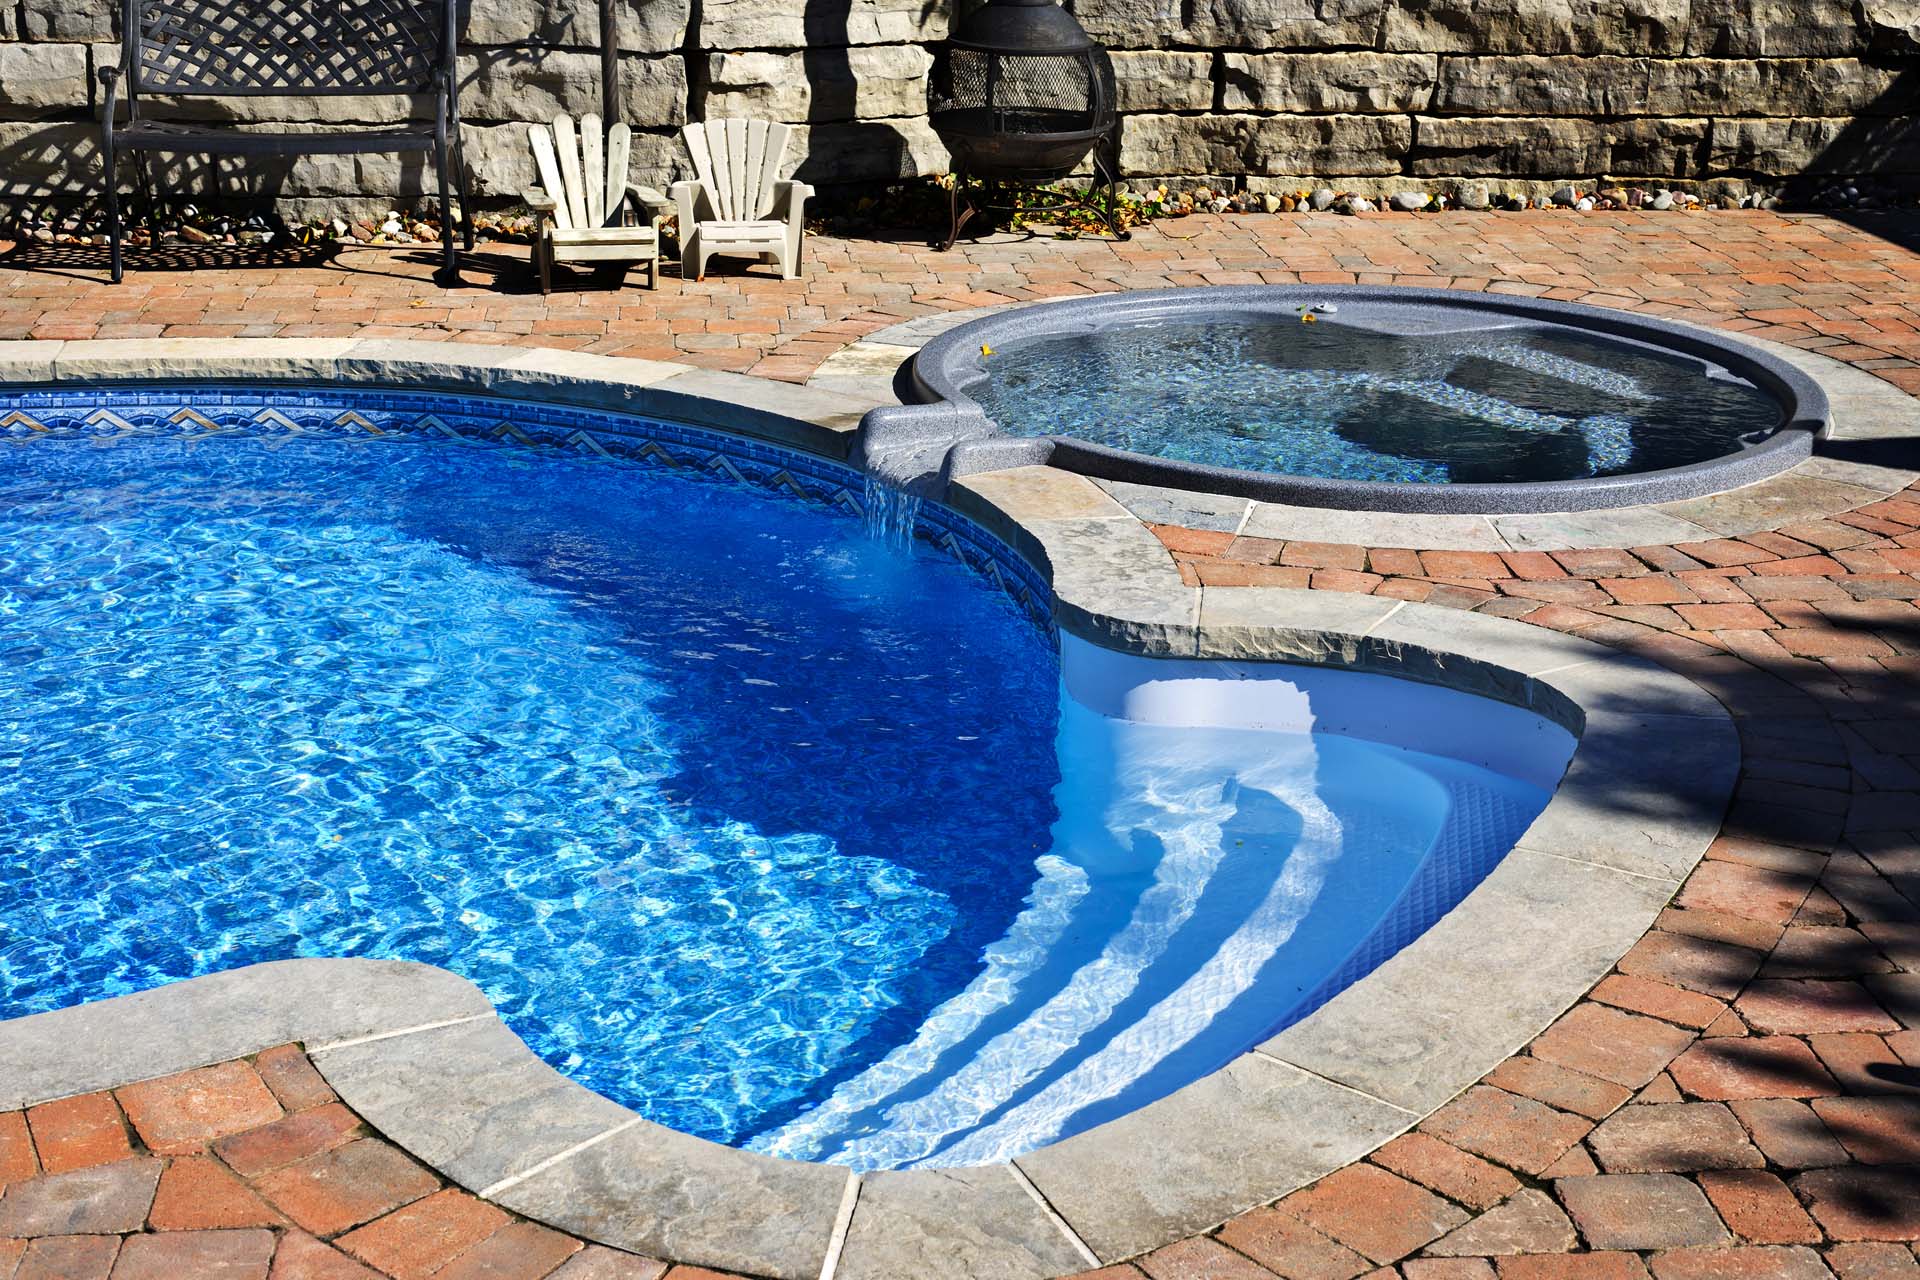 Quality Inground Pool Renovation and Installations